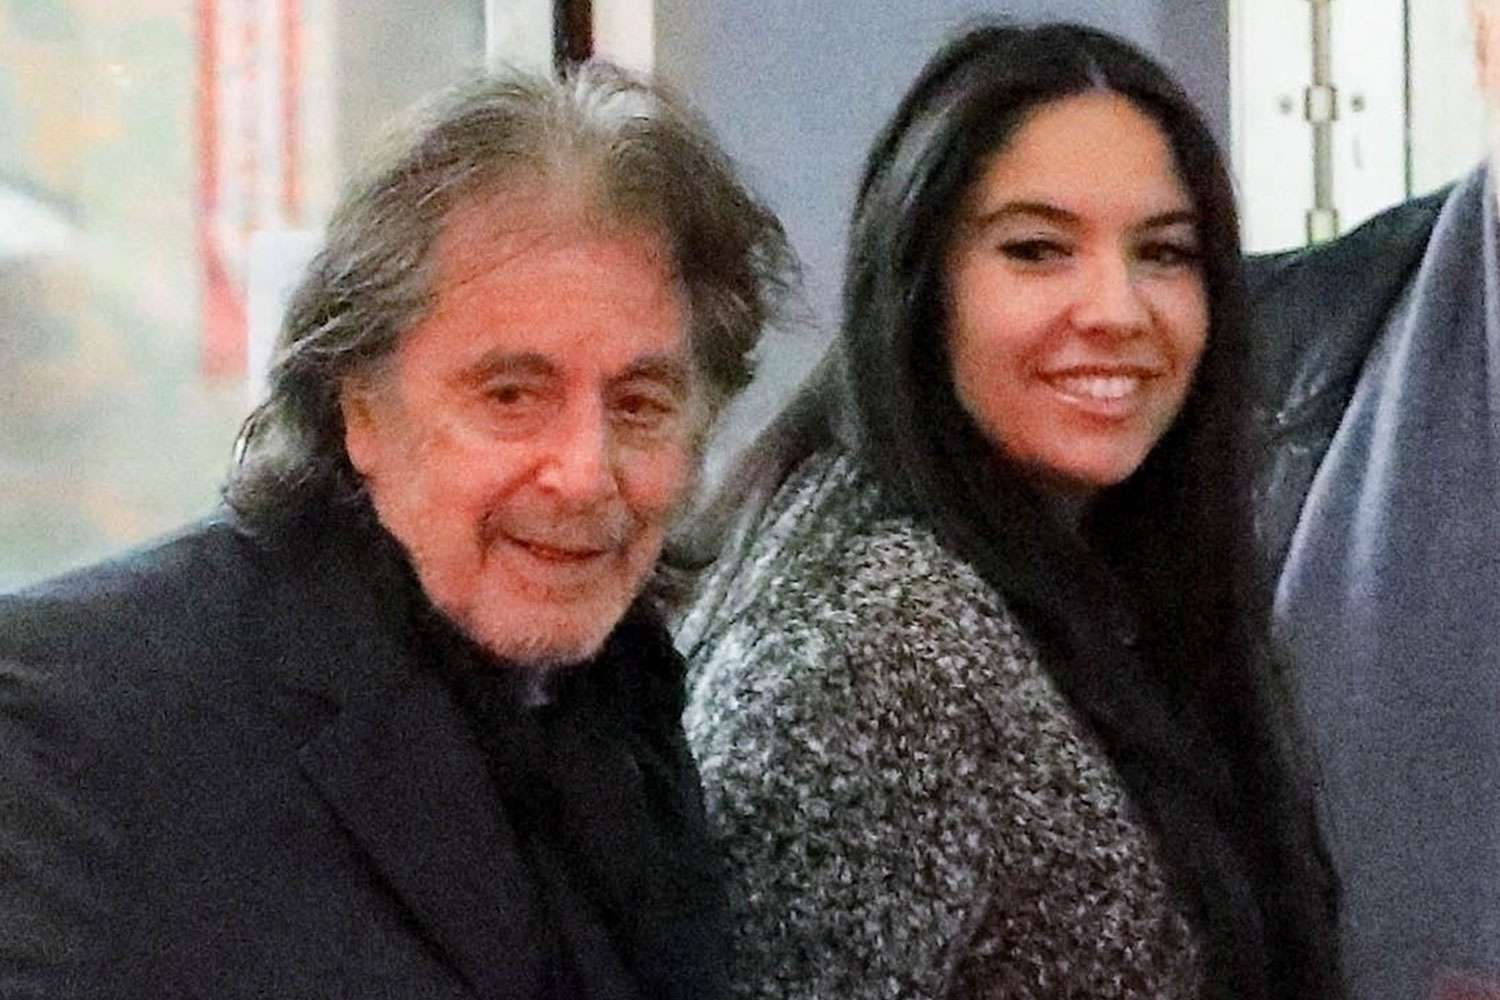 Al Pacino is anticipating his first little one with girlfriend